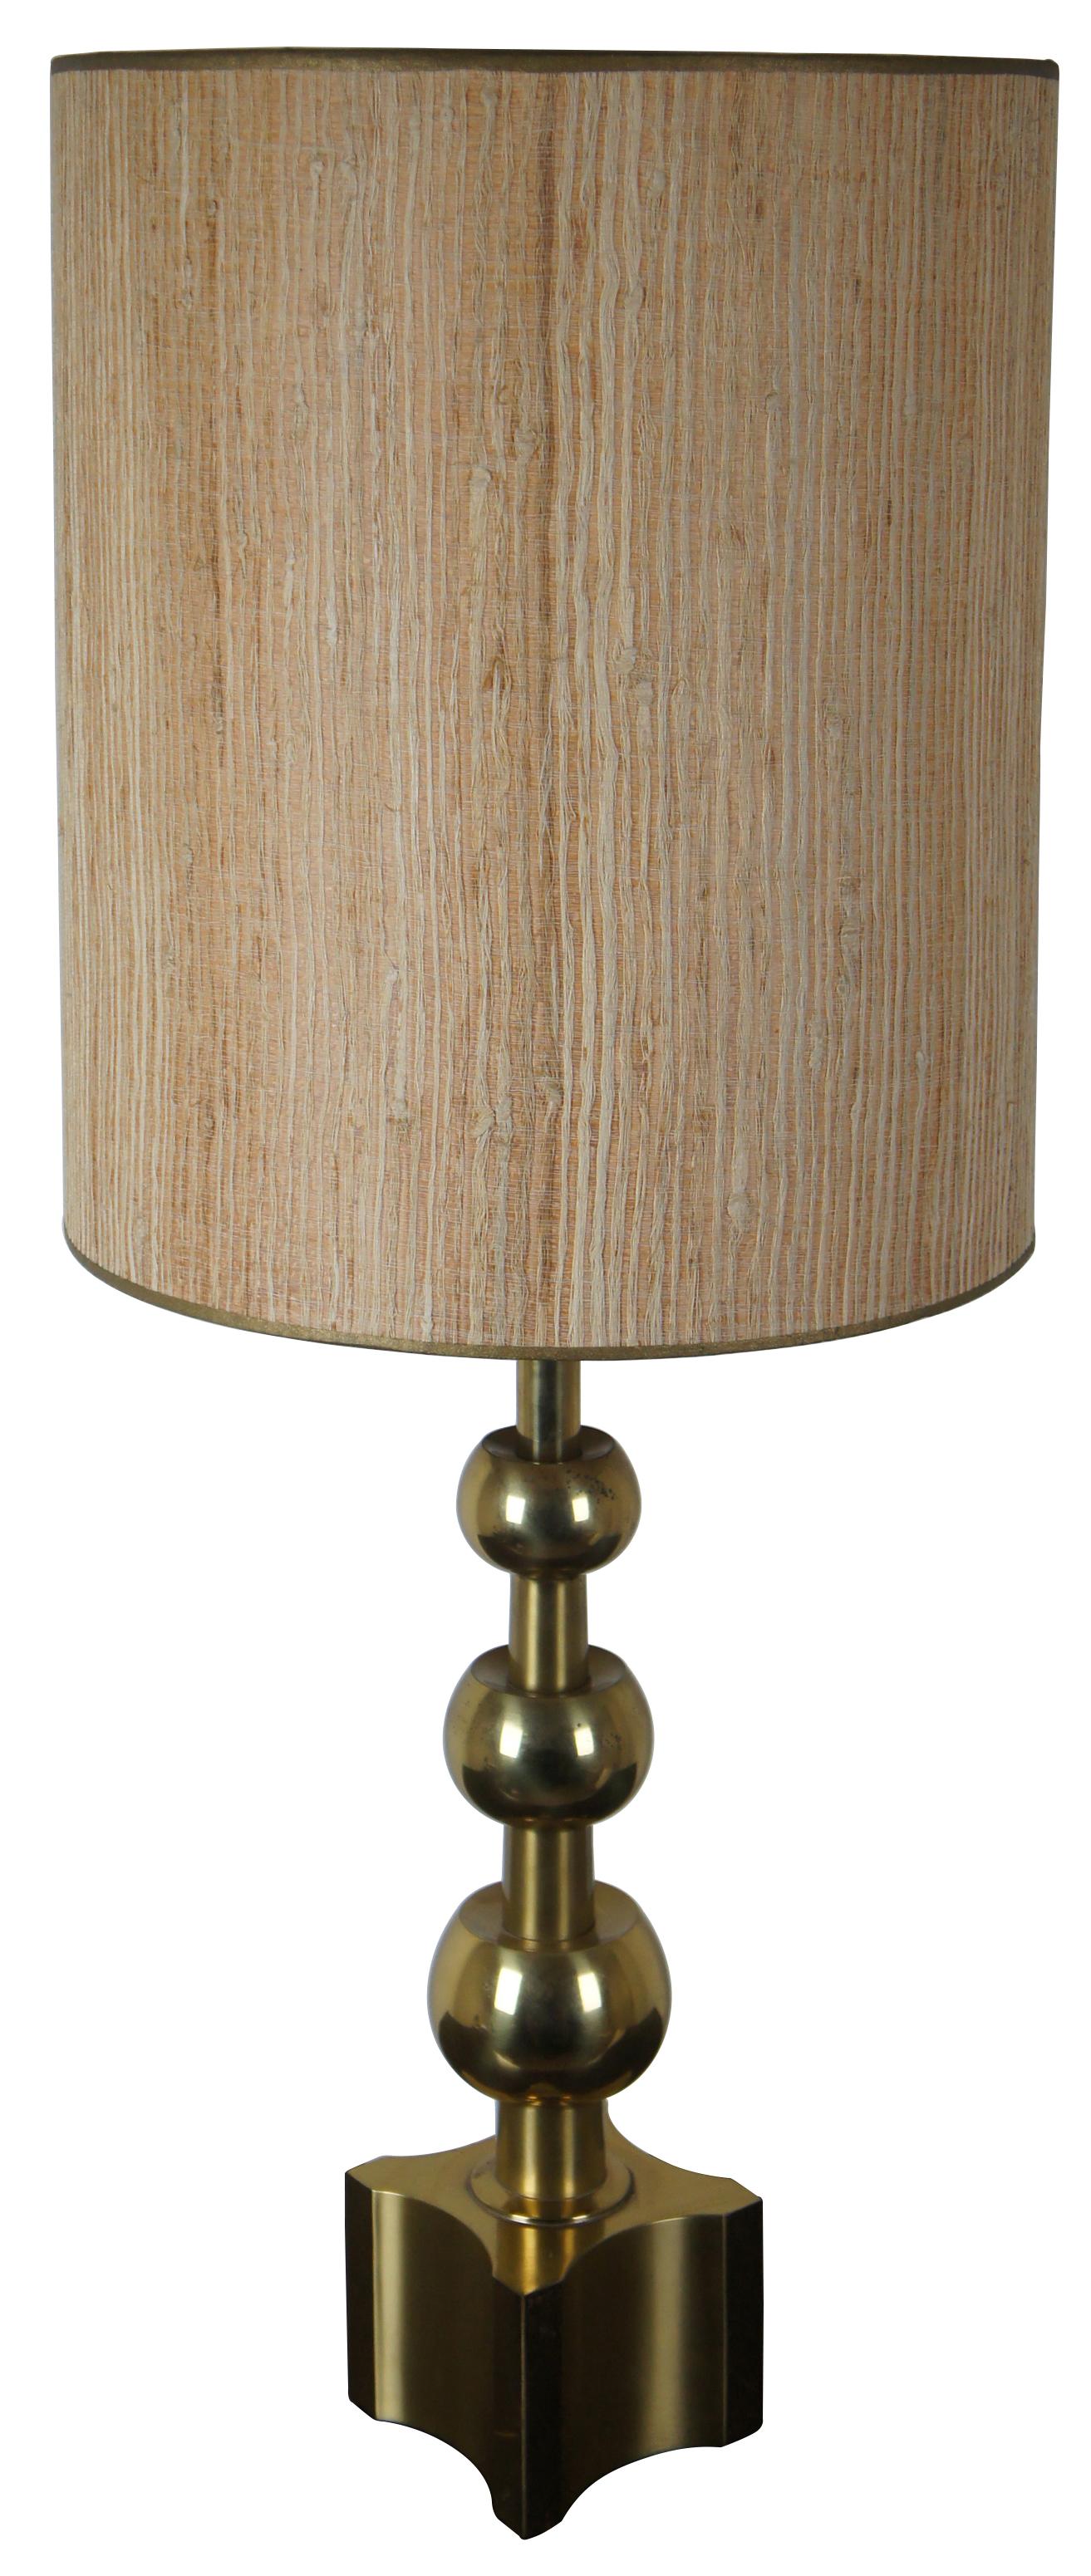 Vintage midcentury Stiffel brass three stack bauble table lamp designed by Tommi Parzinger.

Measures: Height to top of shade 41.75”, shade 16.25” x 19.25”.
   